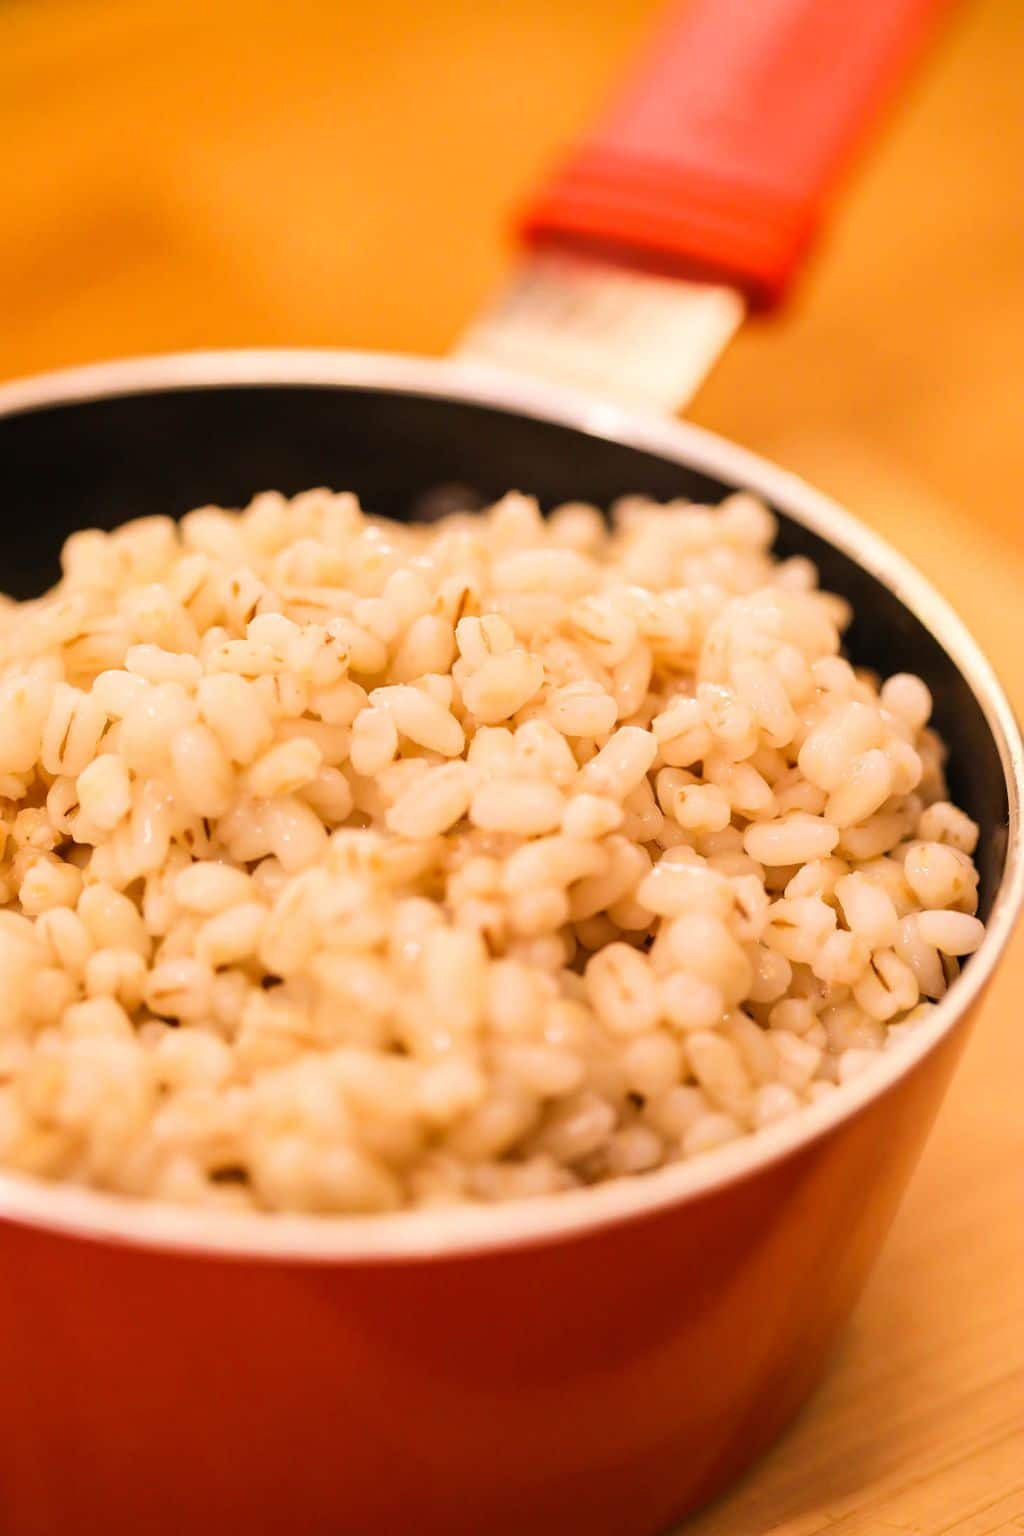 how to cook barley